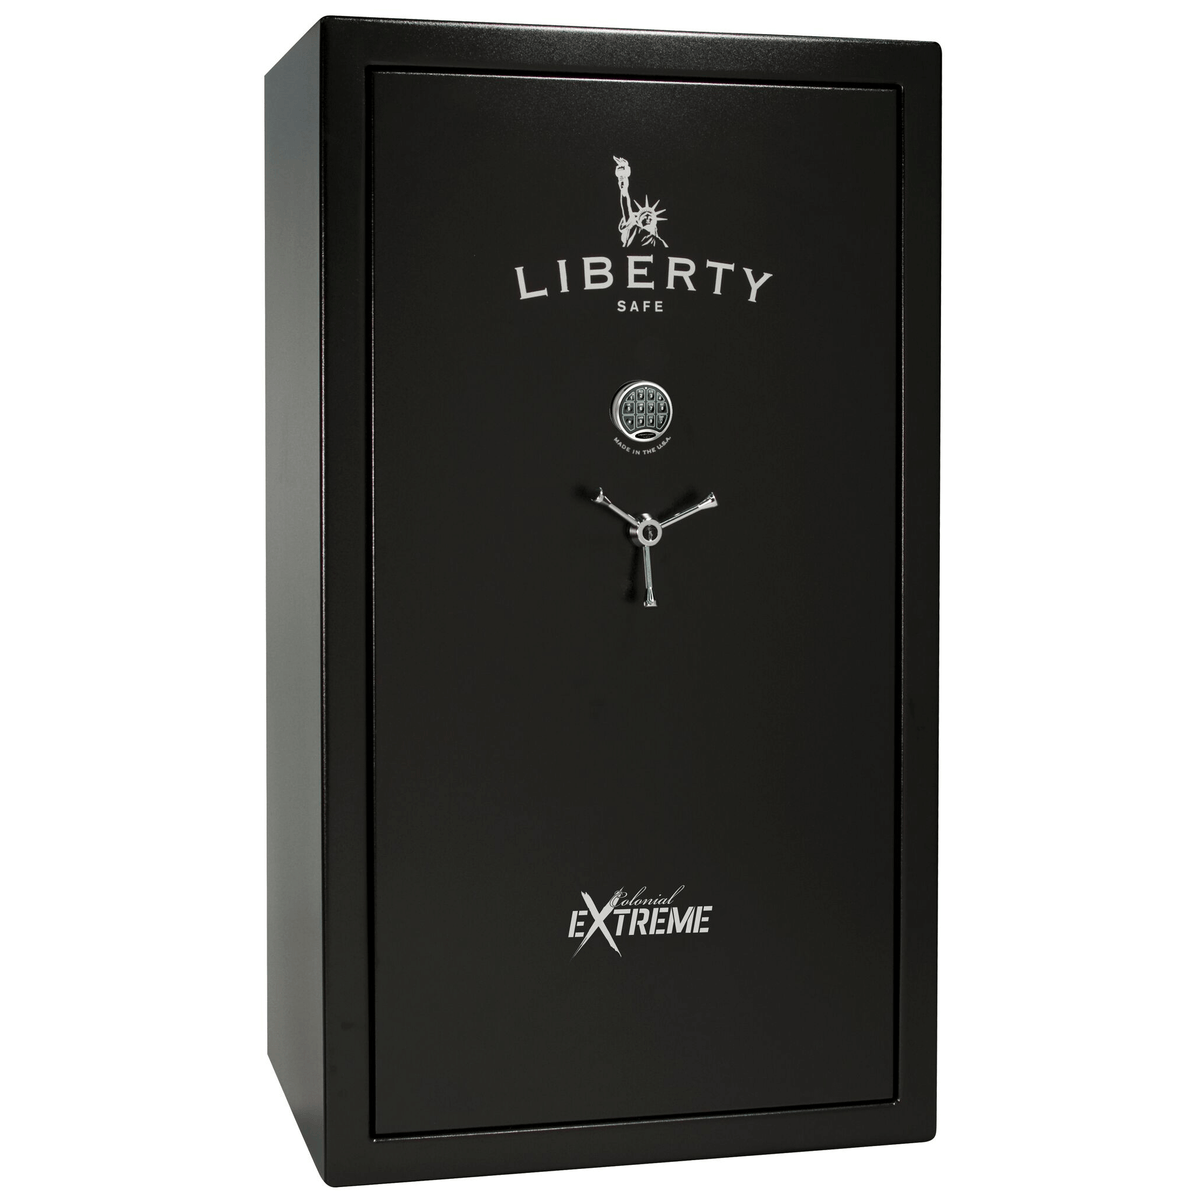 Liberty Colonial 50 Extreme Safe in Textured Black with Chrome Electronic Lock.